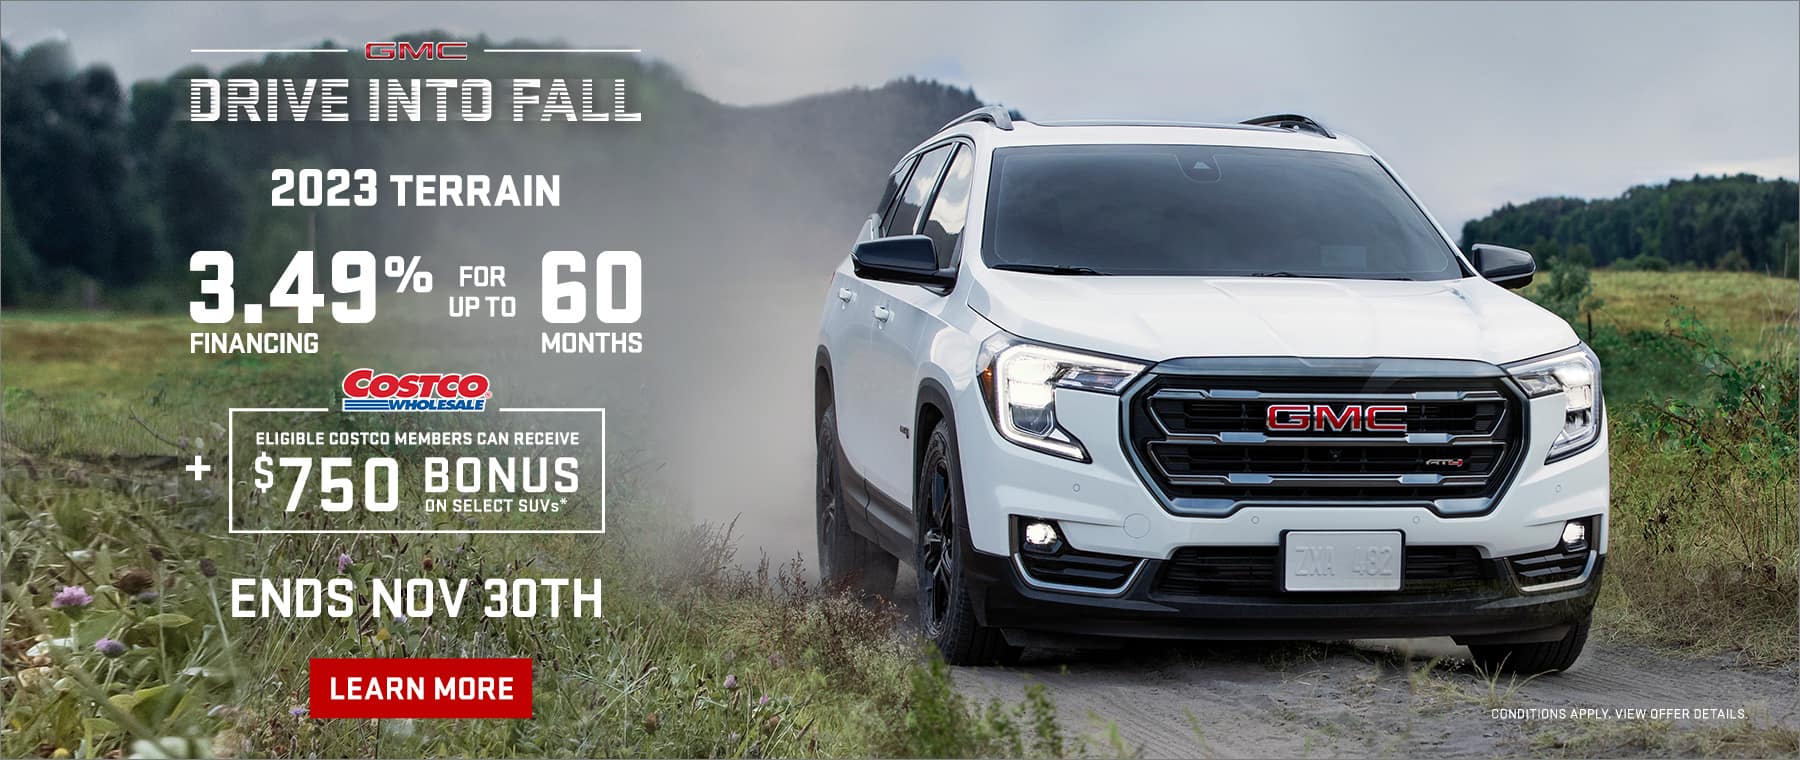 2023 GMC Terrain: 3.49% financing for up to 60 months + eligible Costco members can receive $750 bonus on select SUVs*.